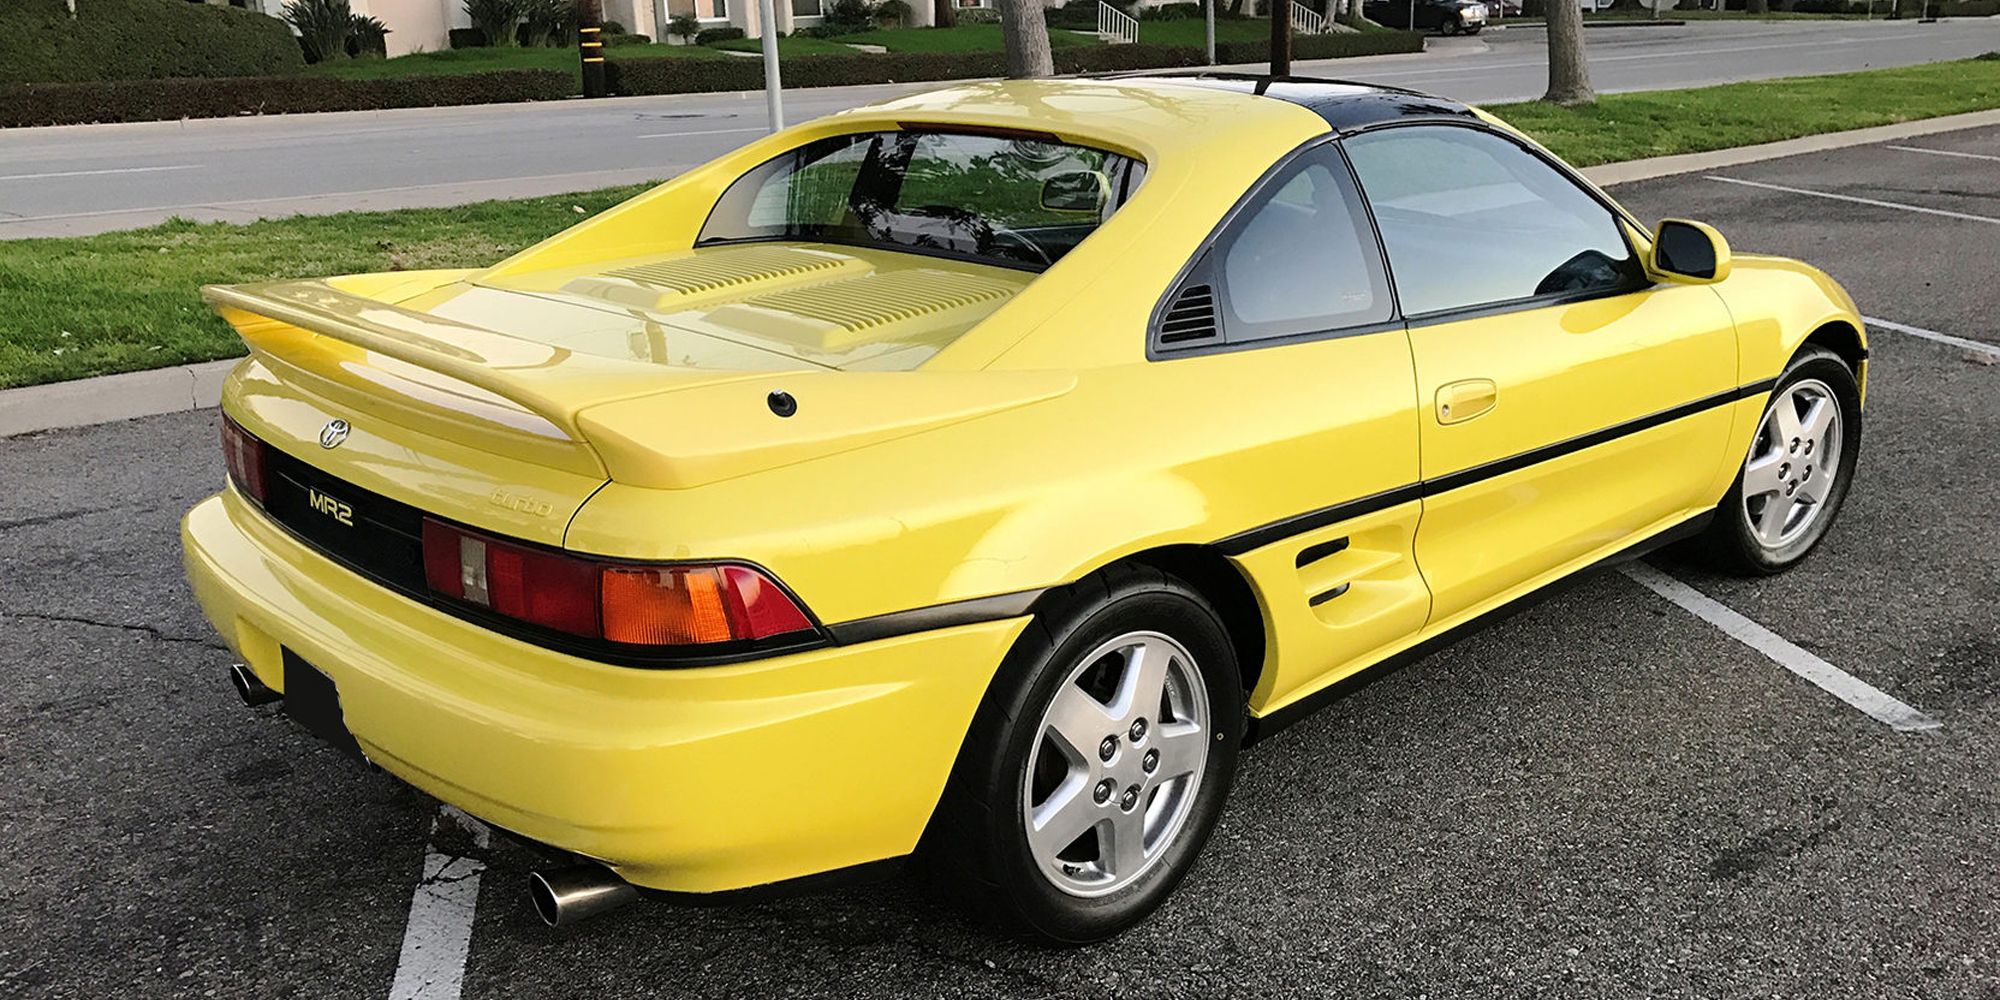 Rear 3/4 view of a yellow MR2 Turbo